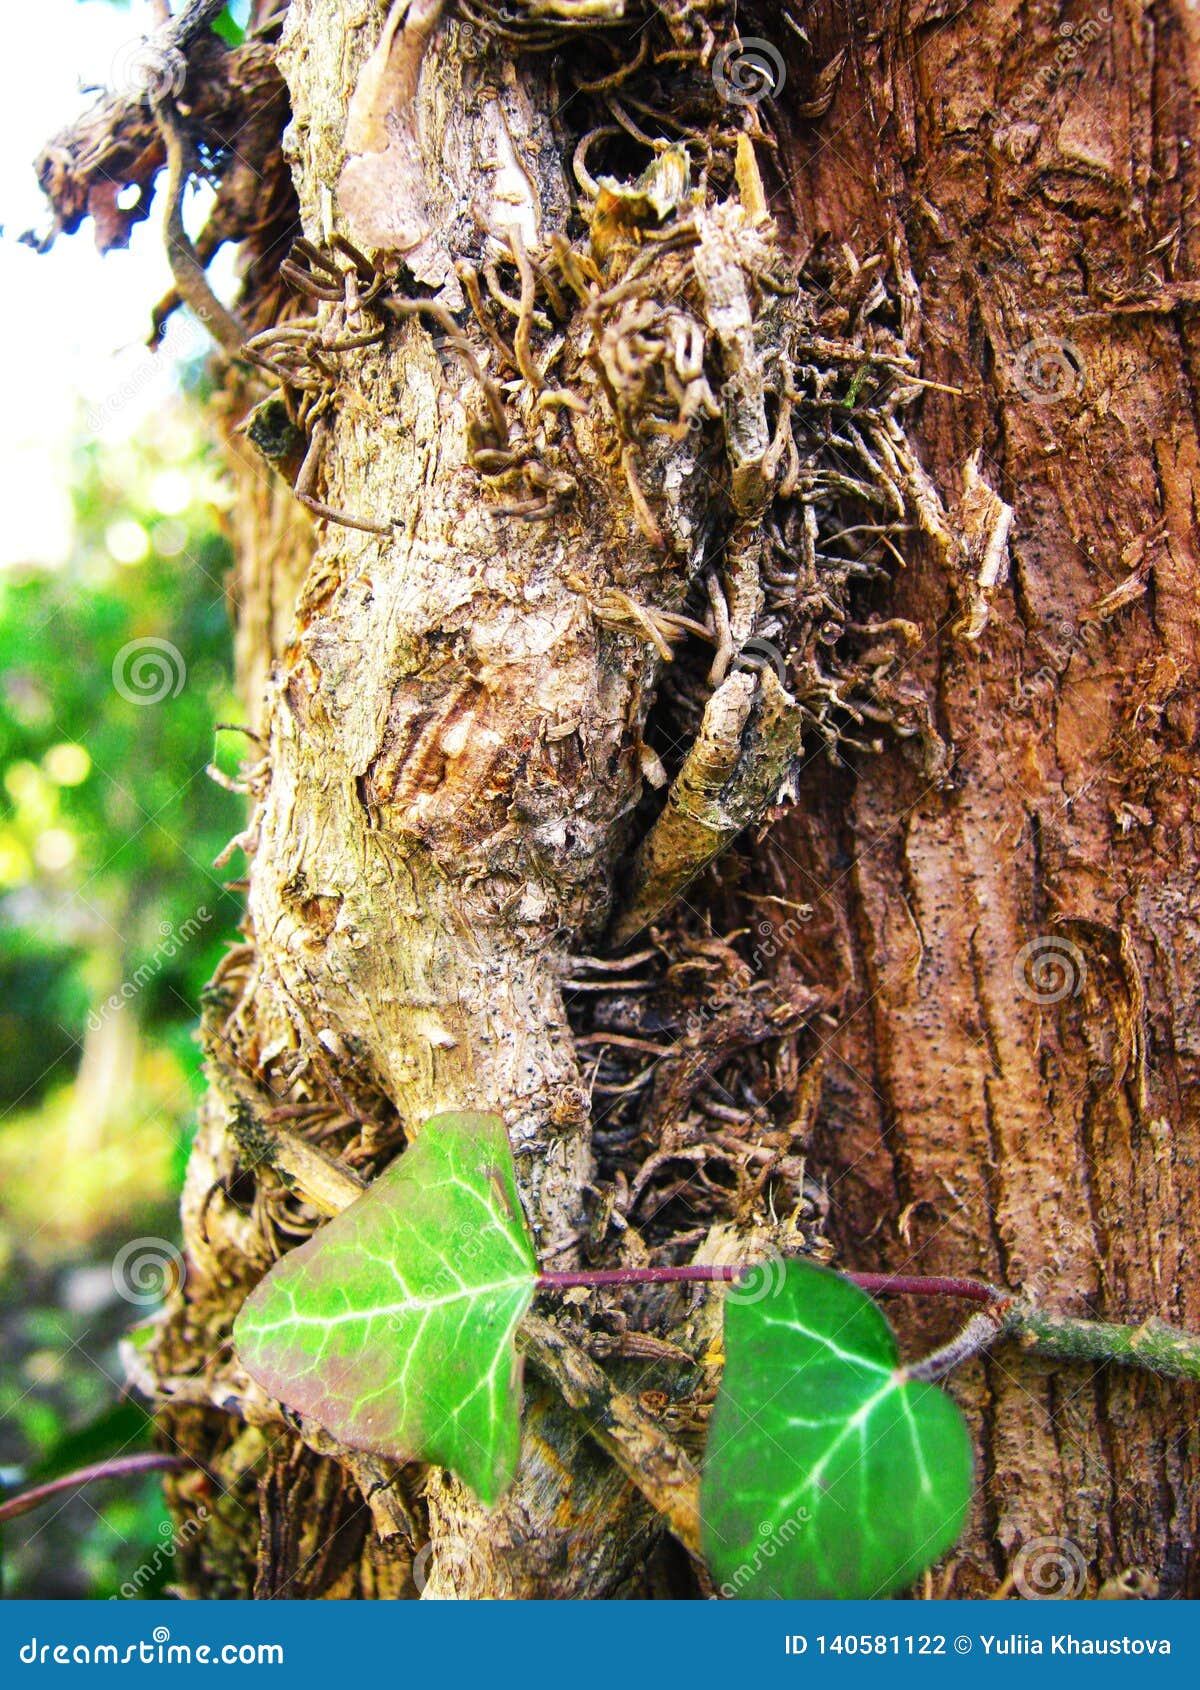 Tree Trunk Entwined with Ivy Vines in the Garden Stock Photo - Image of ...